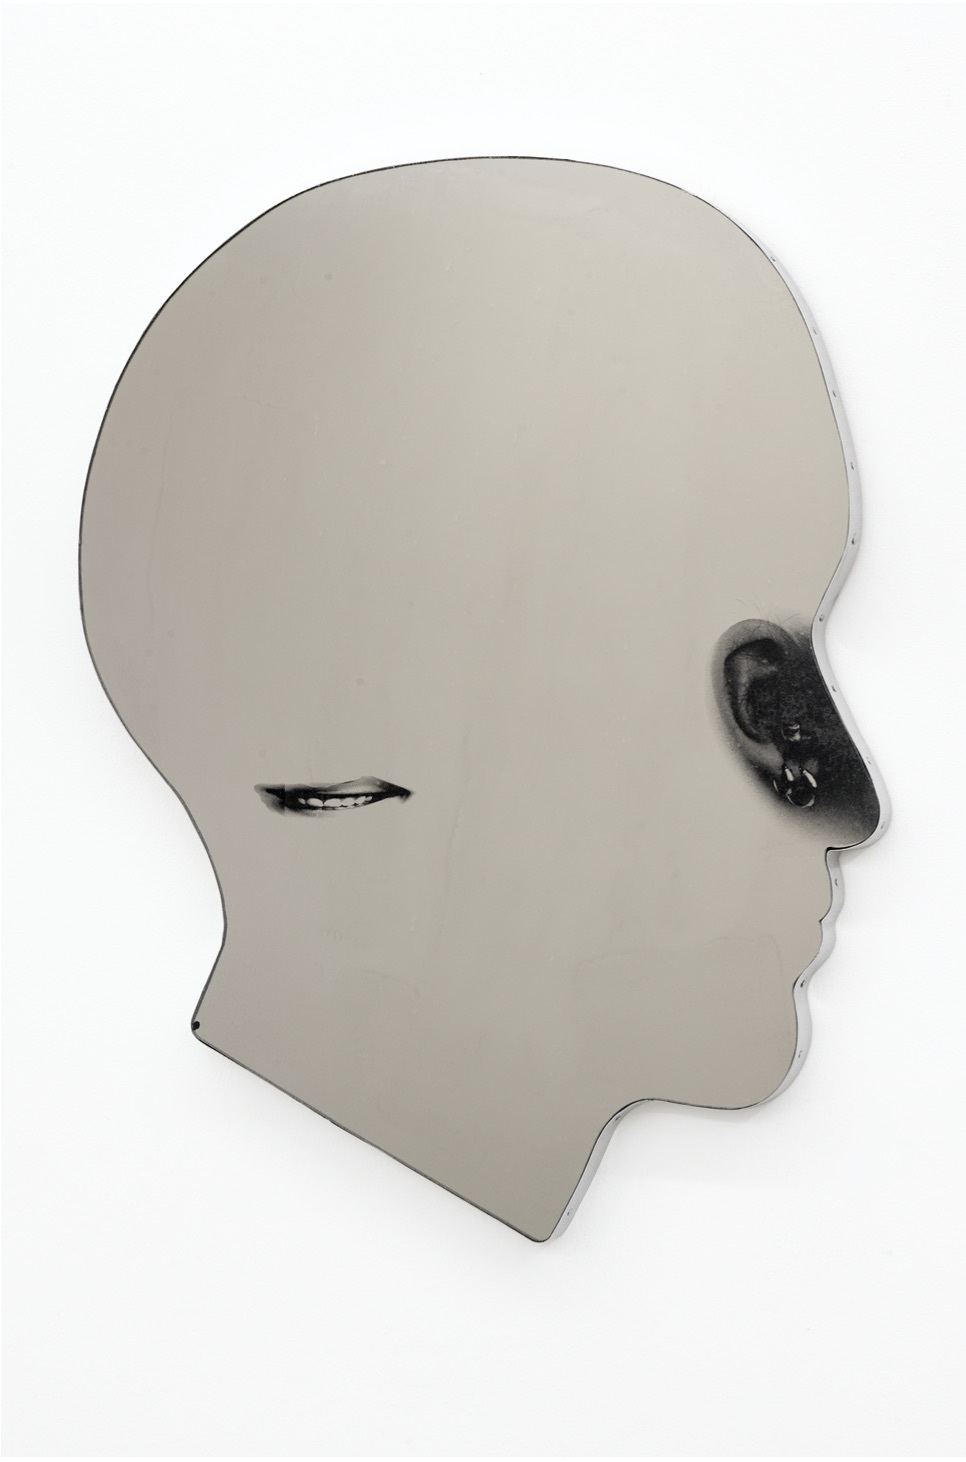 Robert Brambora, untitled (simple), 2021, laser engraving behind glass, lacquer, stainless steel, 68 x 56 cm